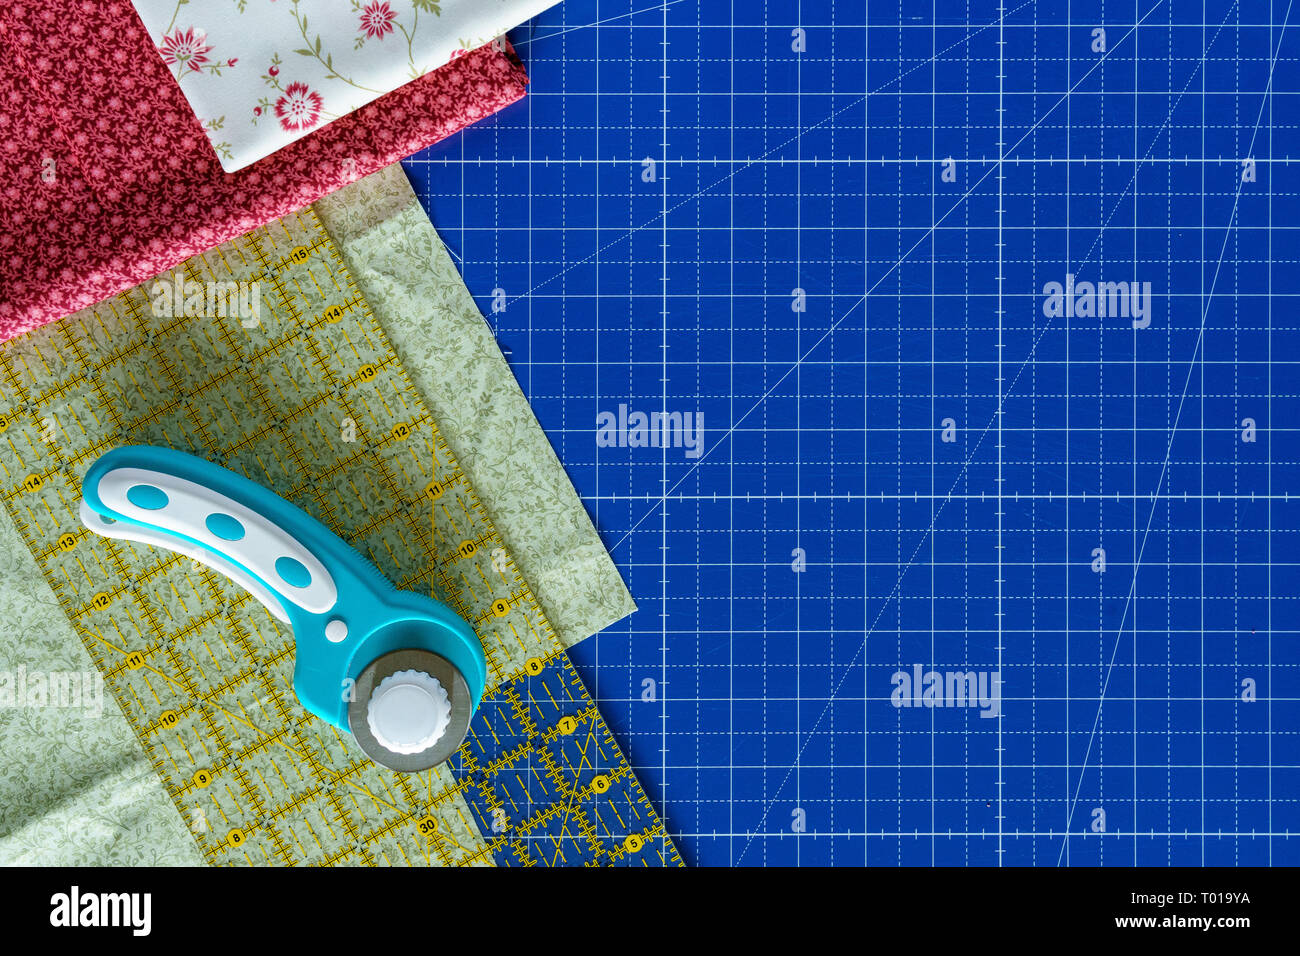 Quilting, Patchwork, Sewing Stickers on Cutting Mat Stock Vector